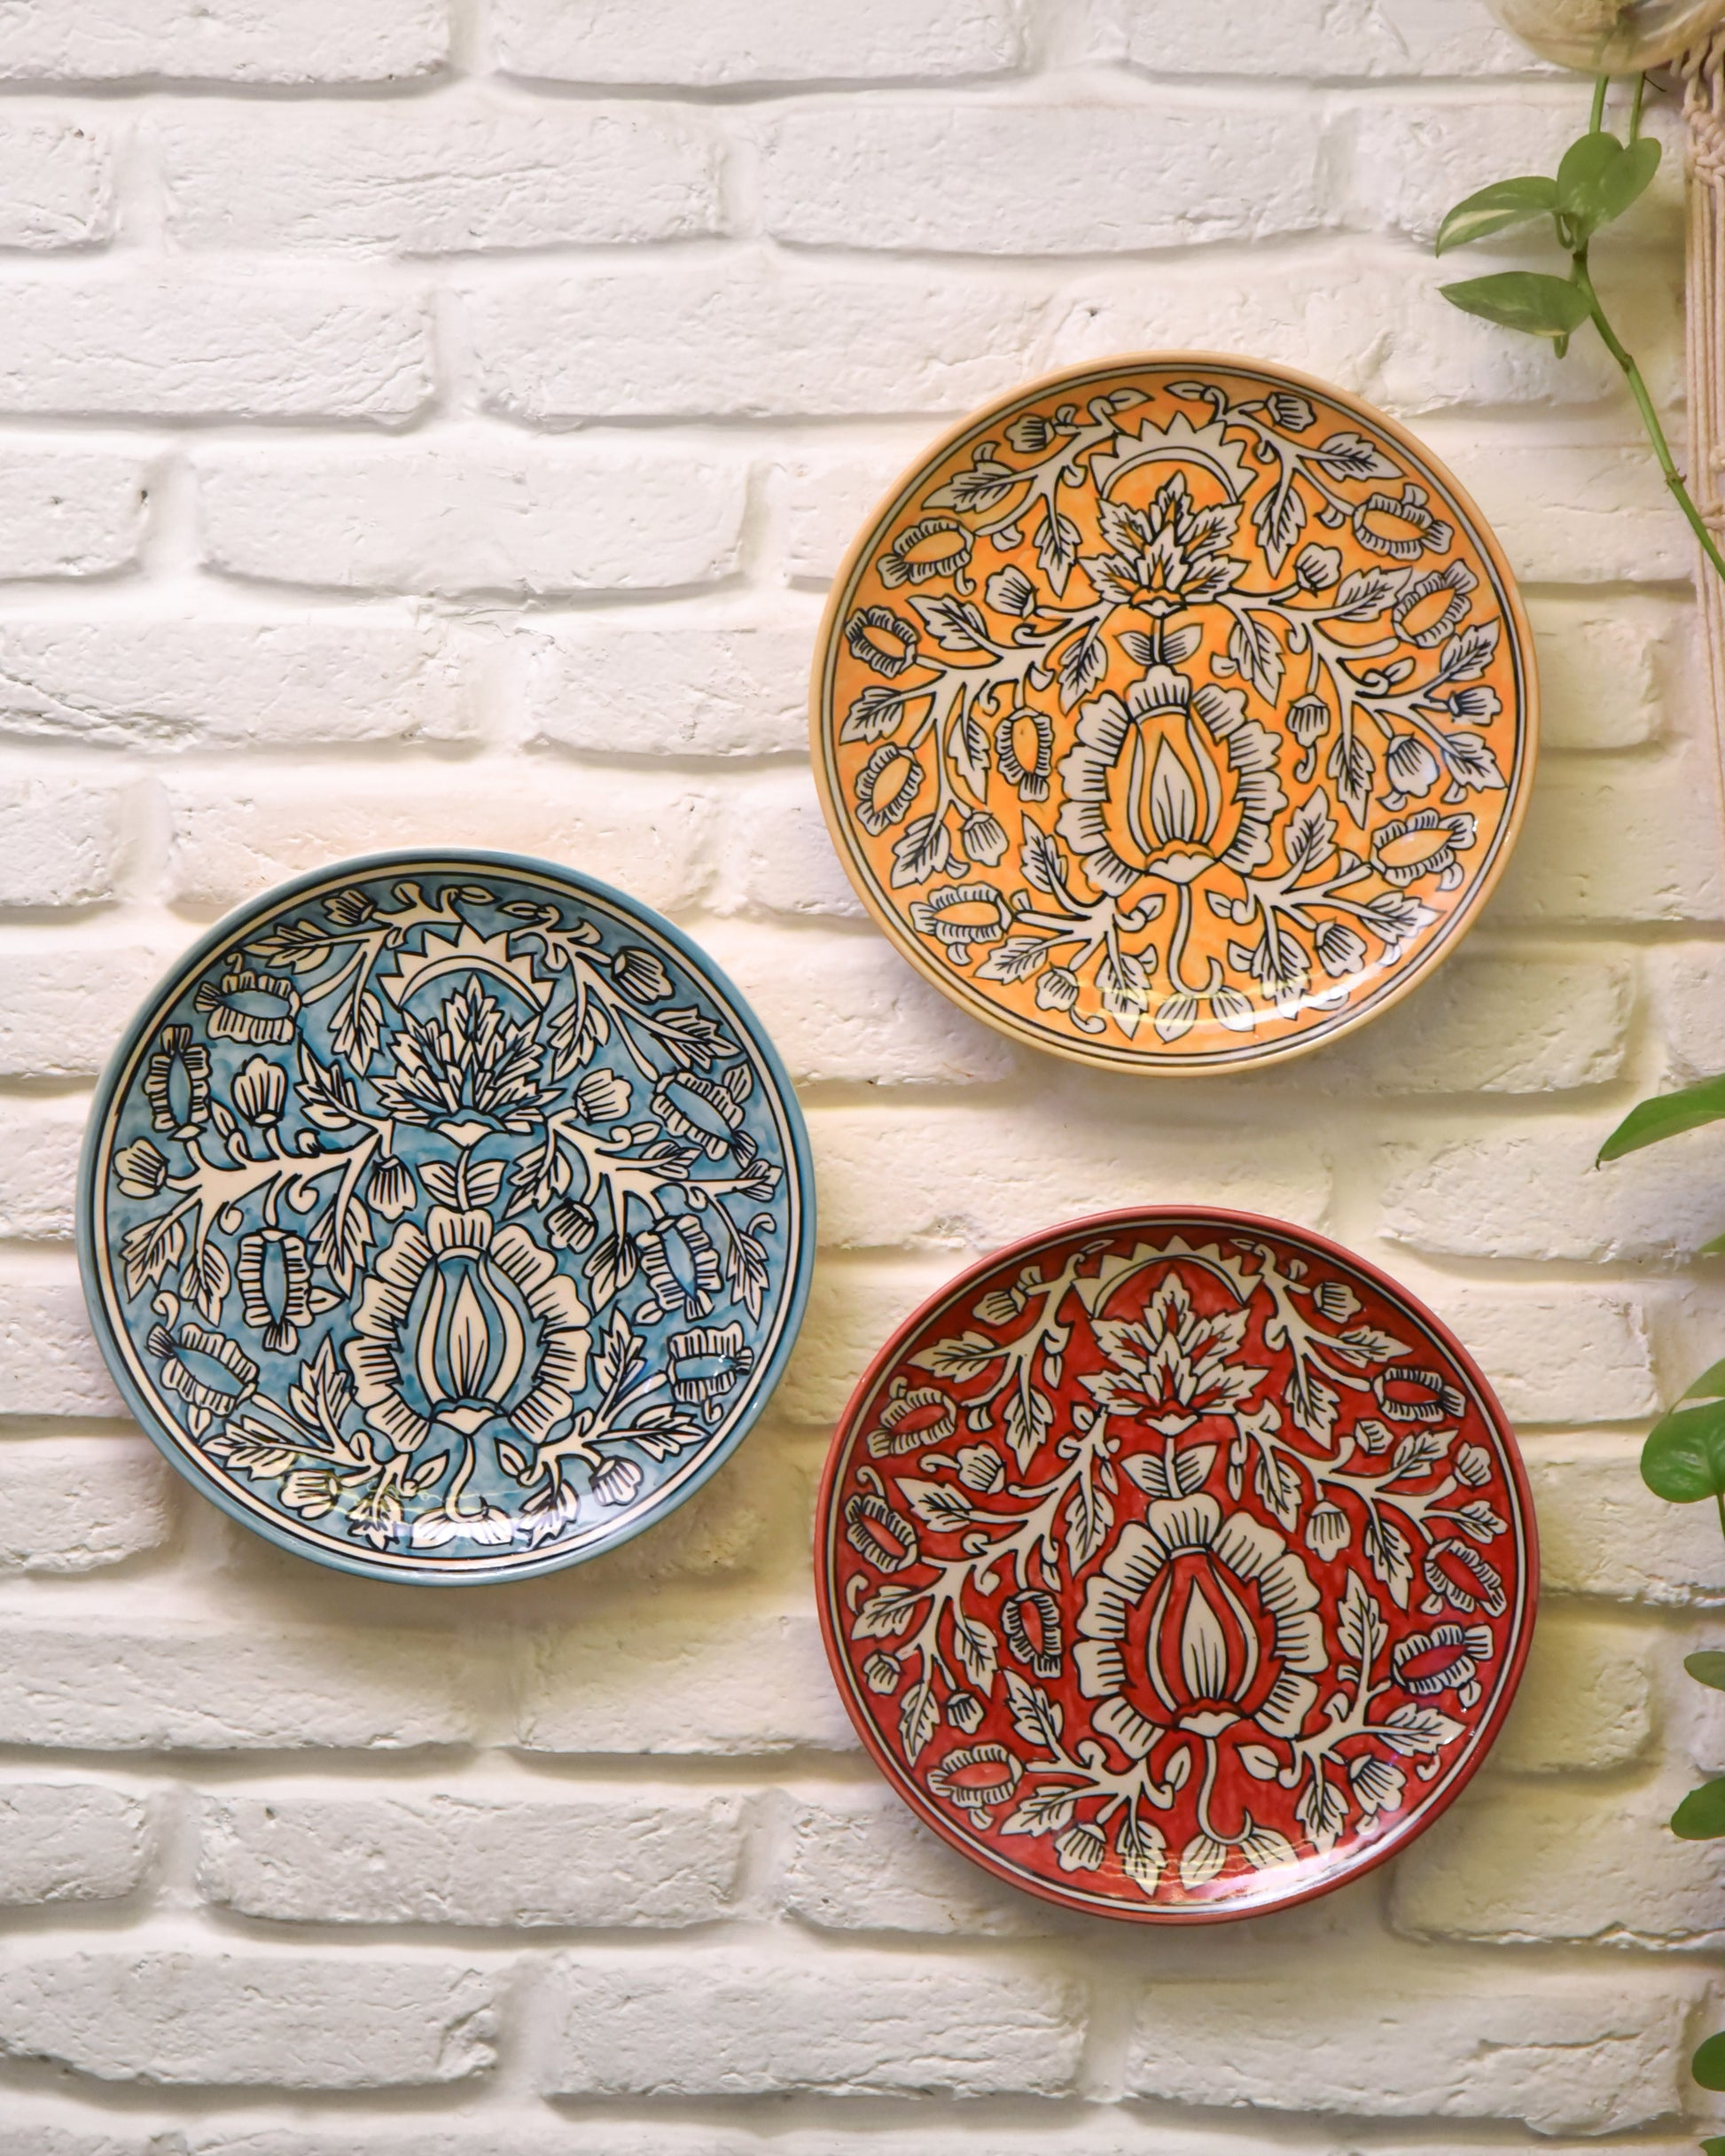  Bedroom décor, Classical wall plate, Hand painted wall art, Handcrafted wall plate, Hanging wall décor, Indian artisan’s craftsmanship, Living room décor, Vibrant wall plates set, Wall accent pieces, Yellow flower wall plate,TESU